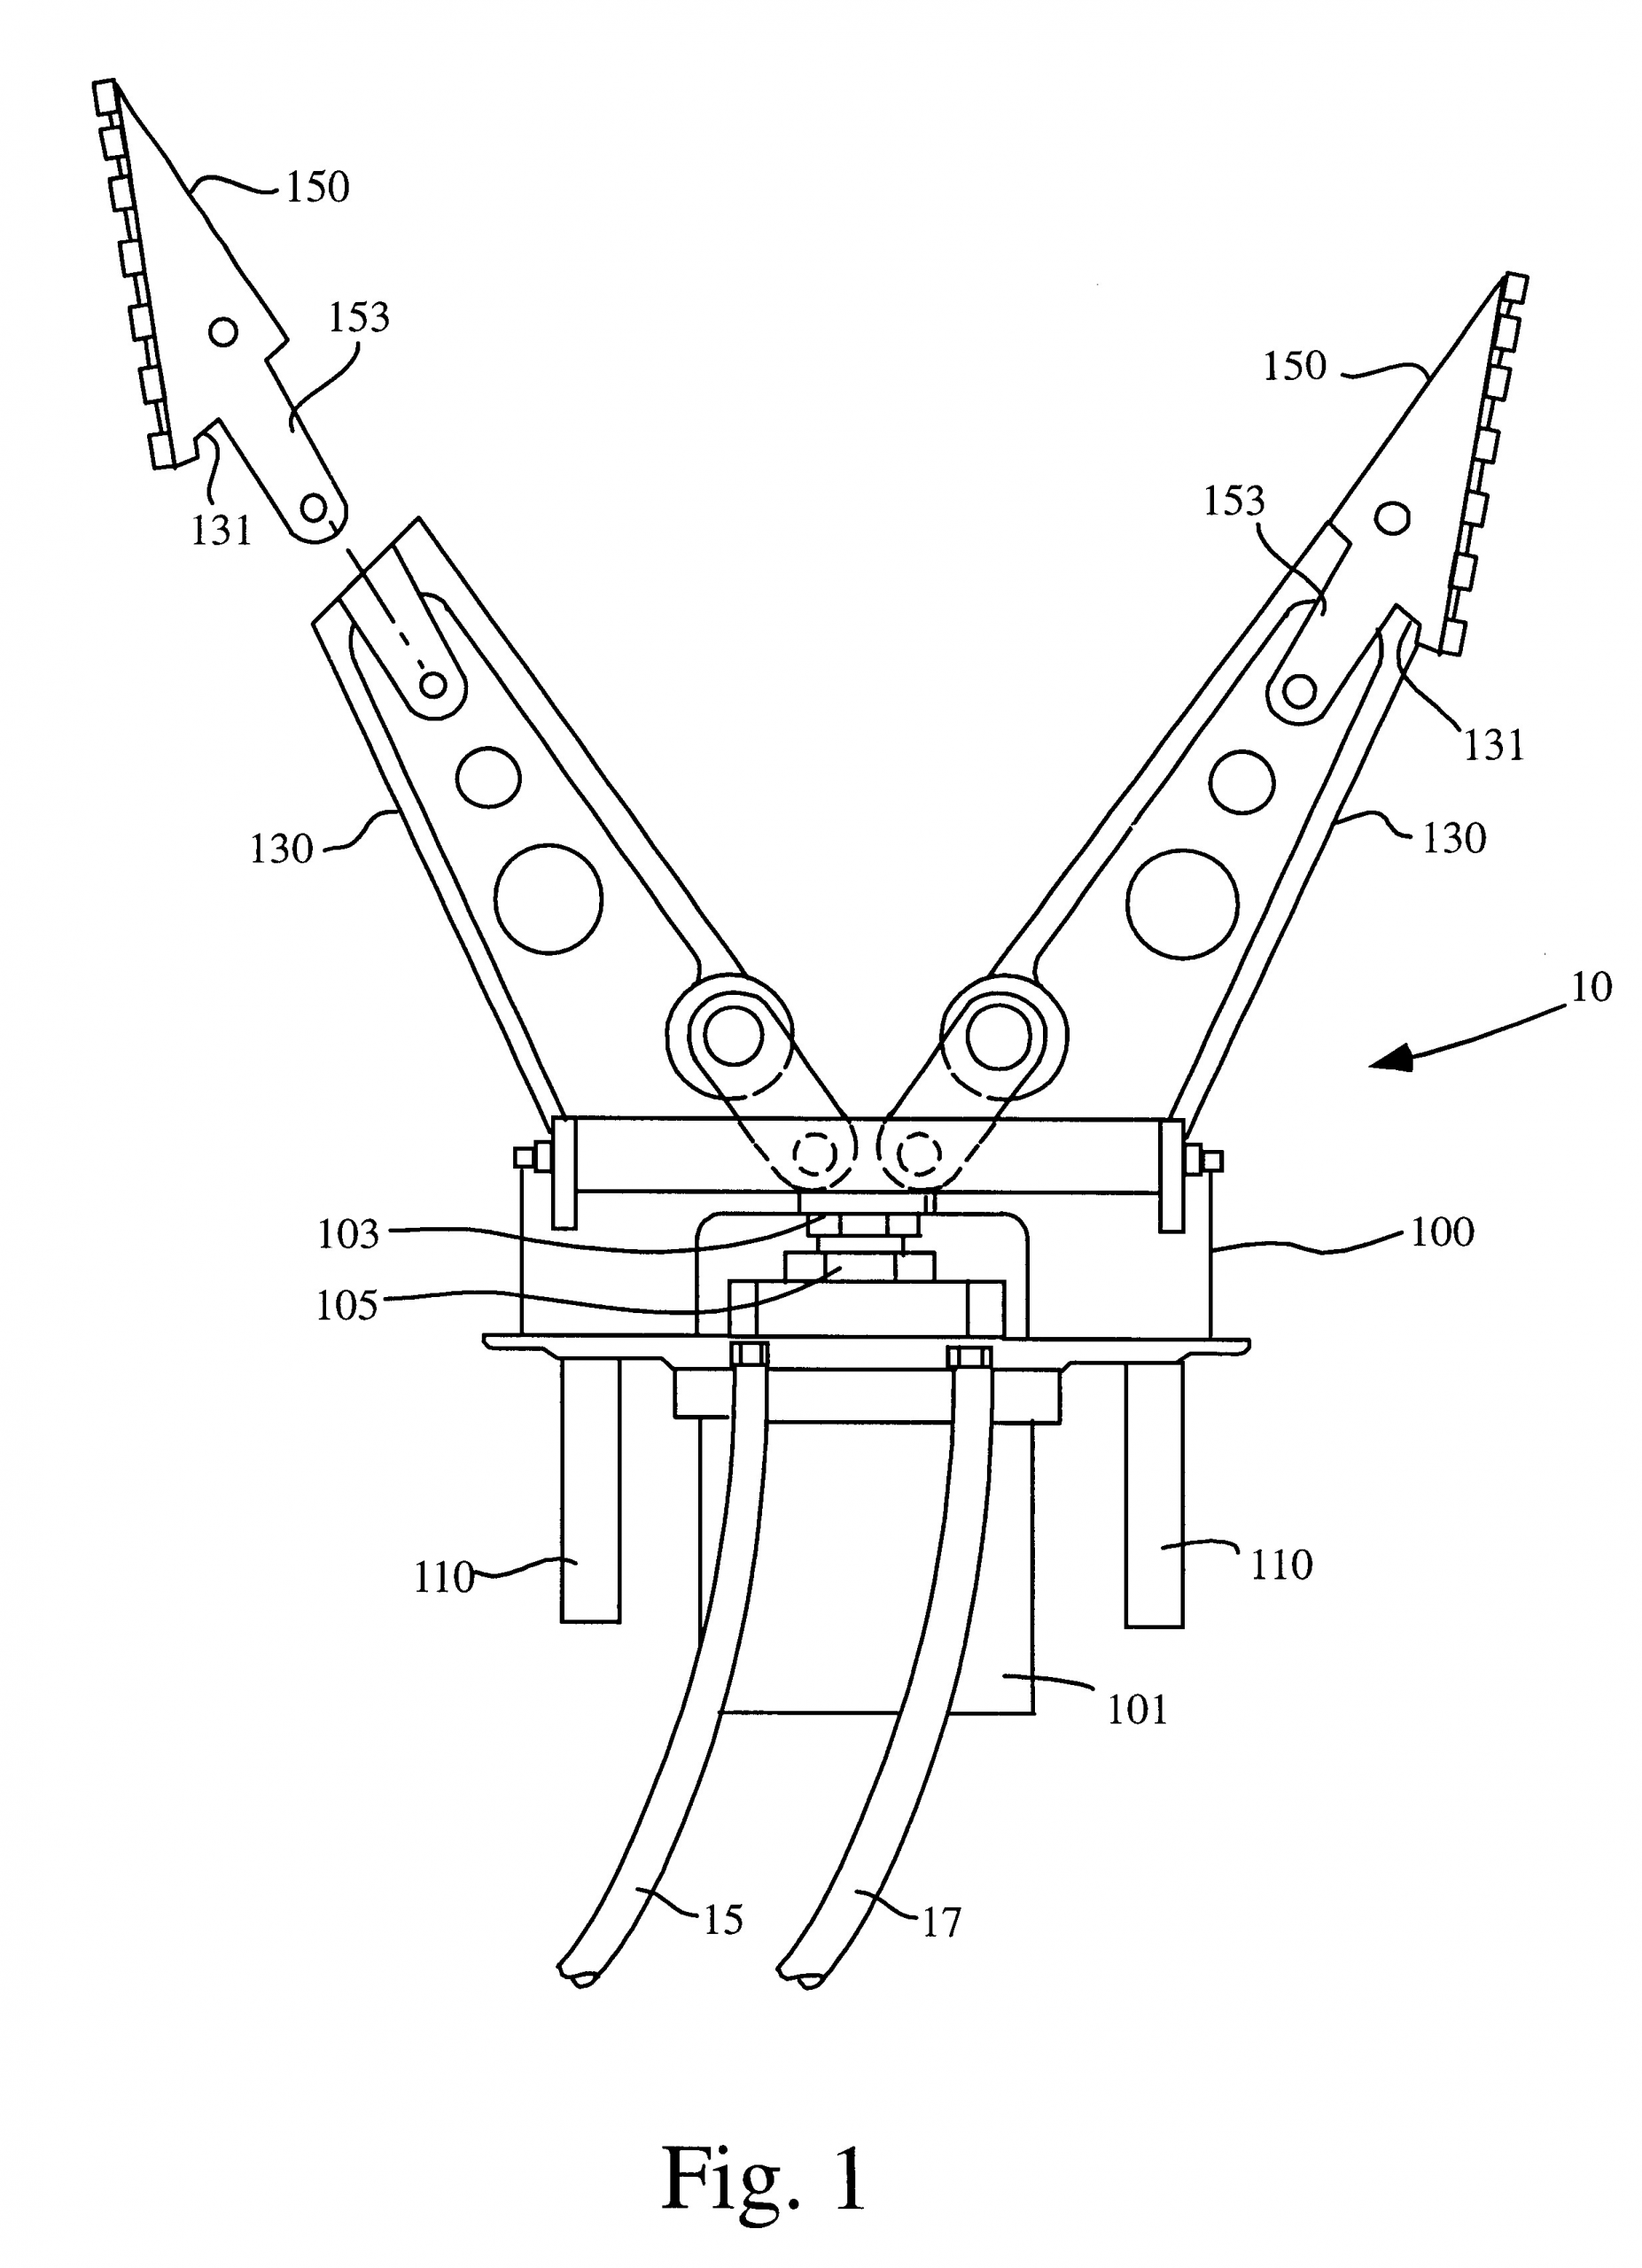 Show A Labelled Diagram Of A Jaws Of Life Resue tool Patent Us Blade Tip for A Rescue tool Google Patents